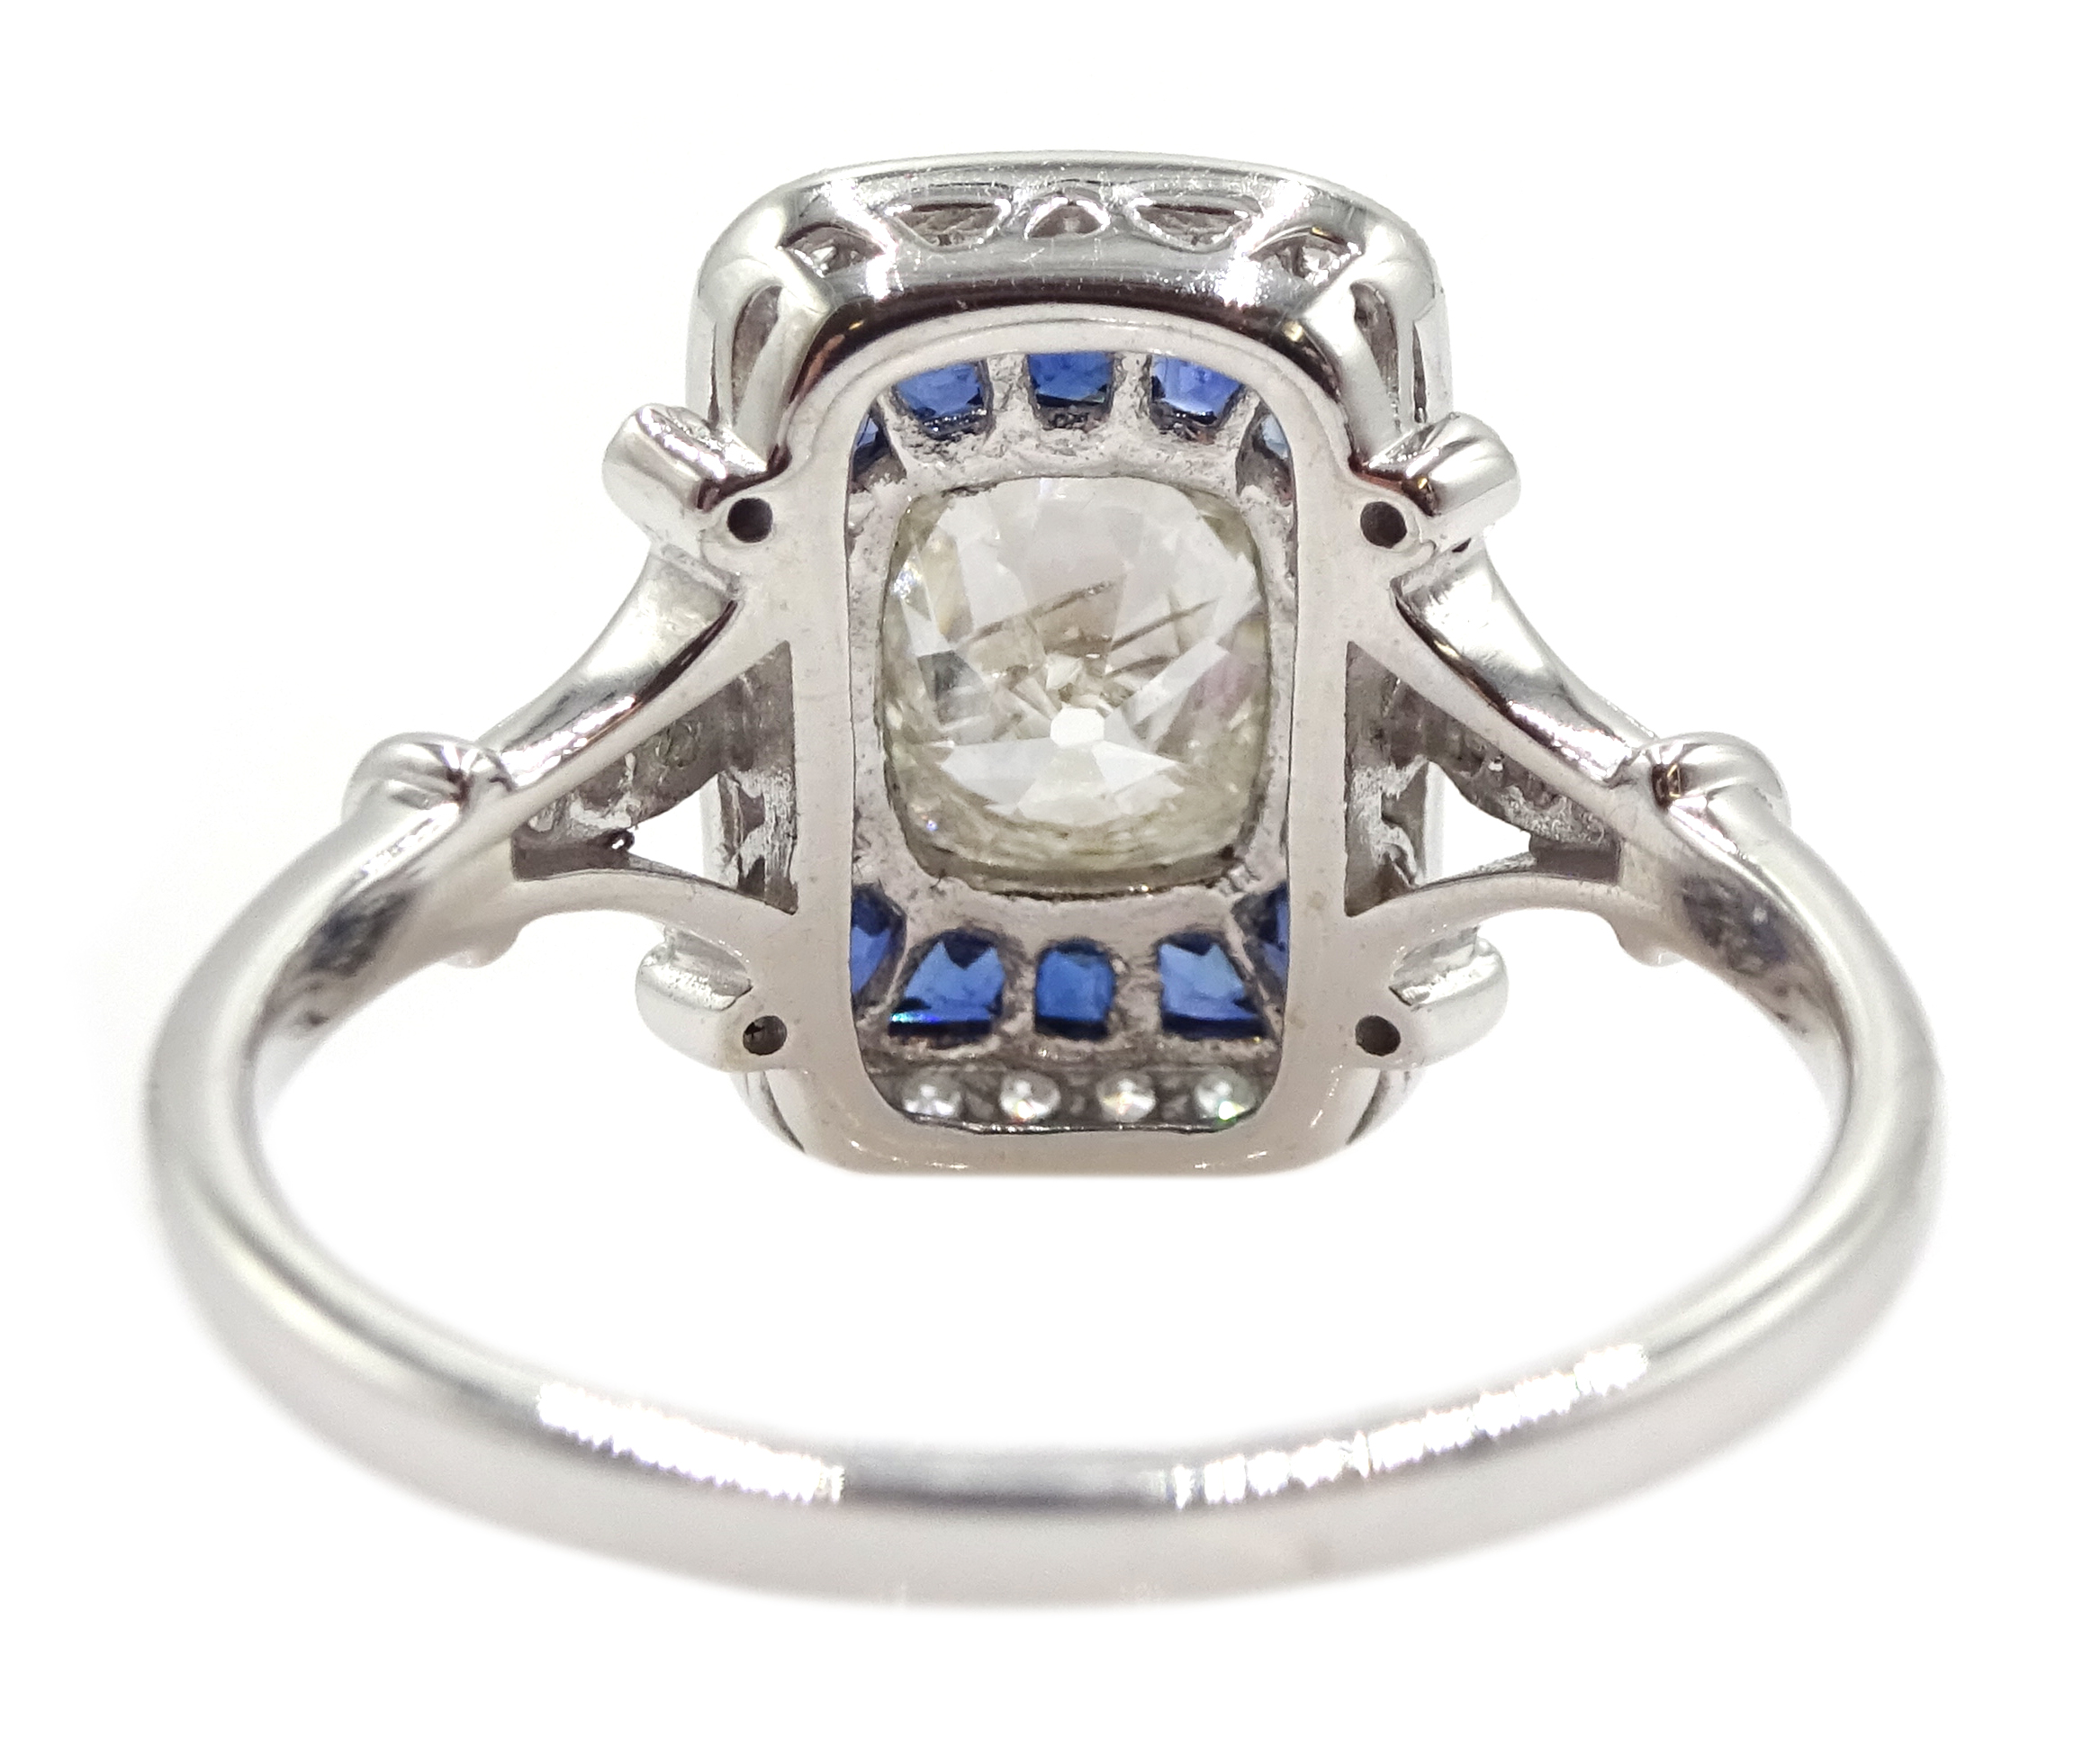 Art Deco style 18ct white gold, sapphire and diamond ring, central old cut diamond surrounded by sa - Image 6 of 6